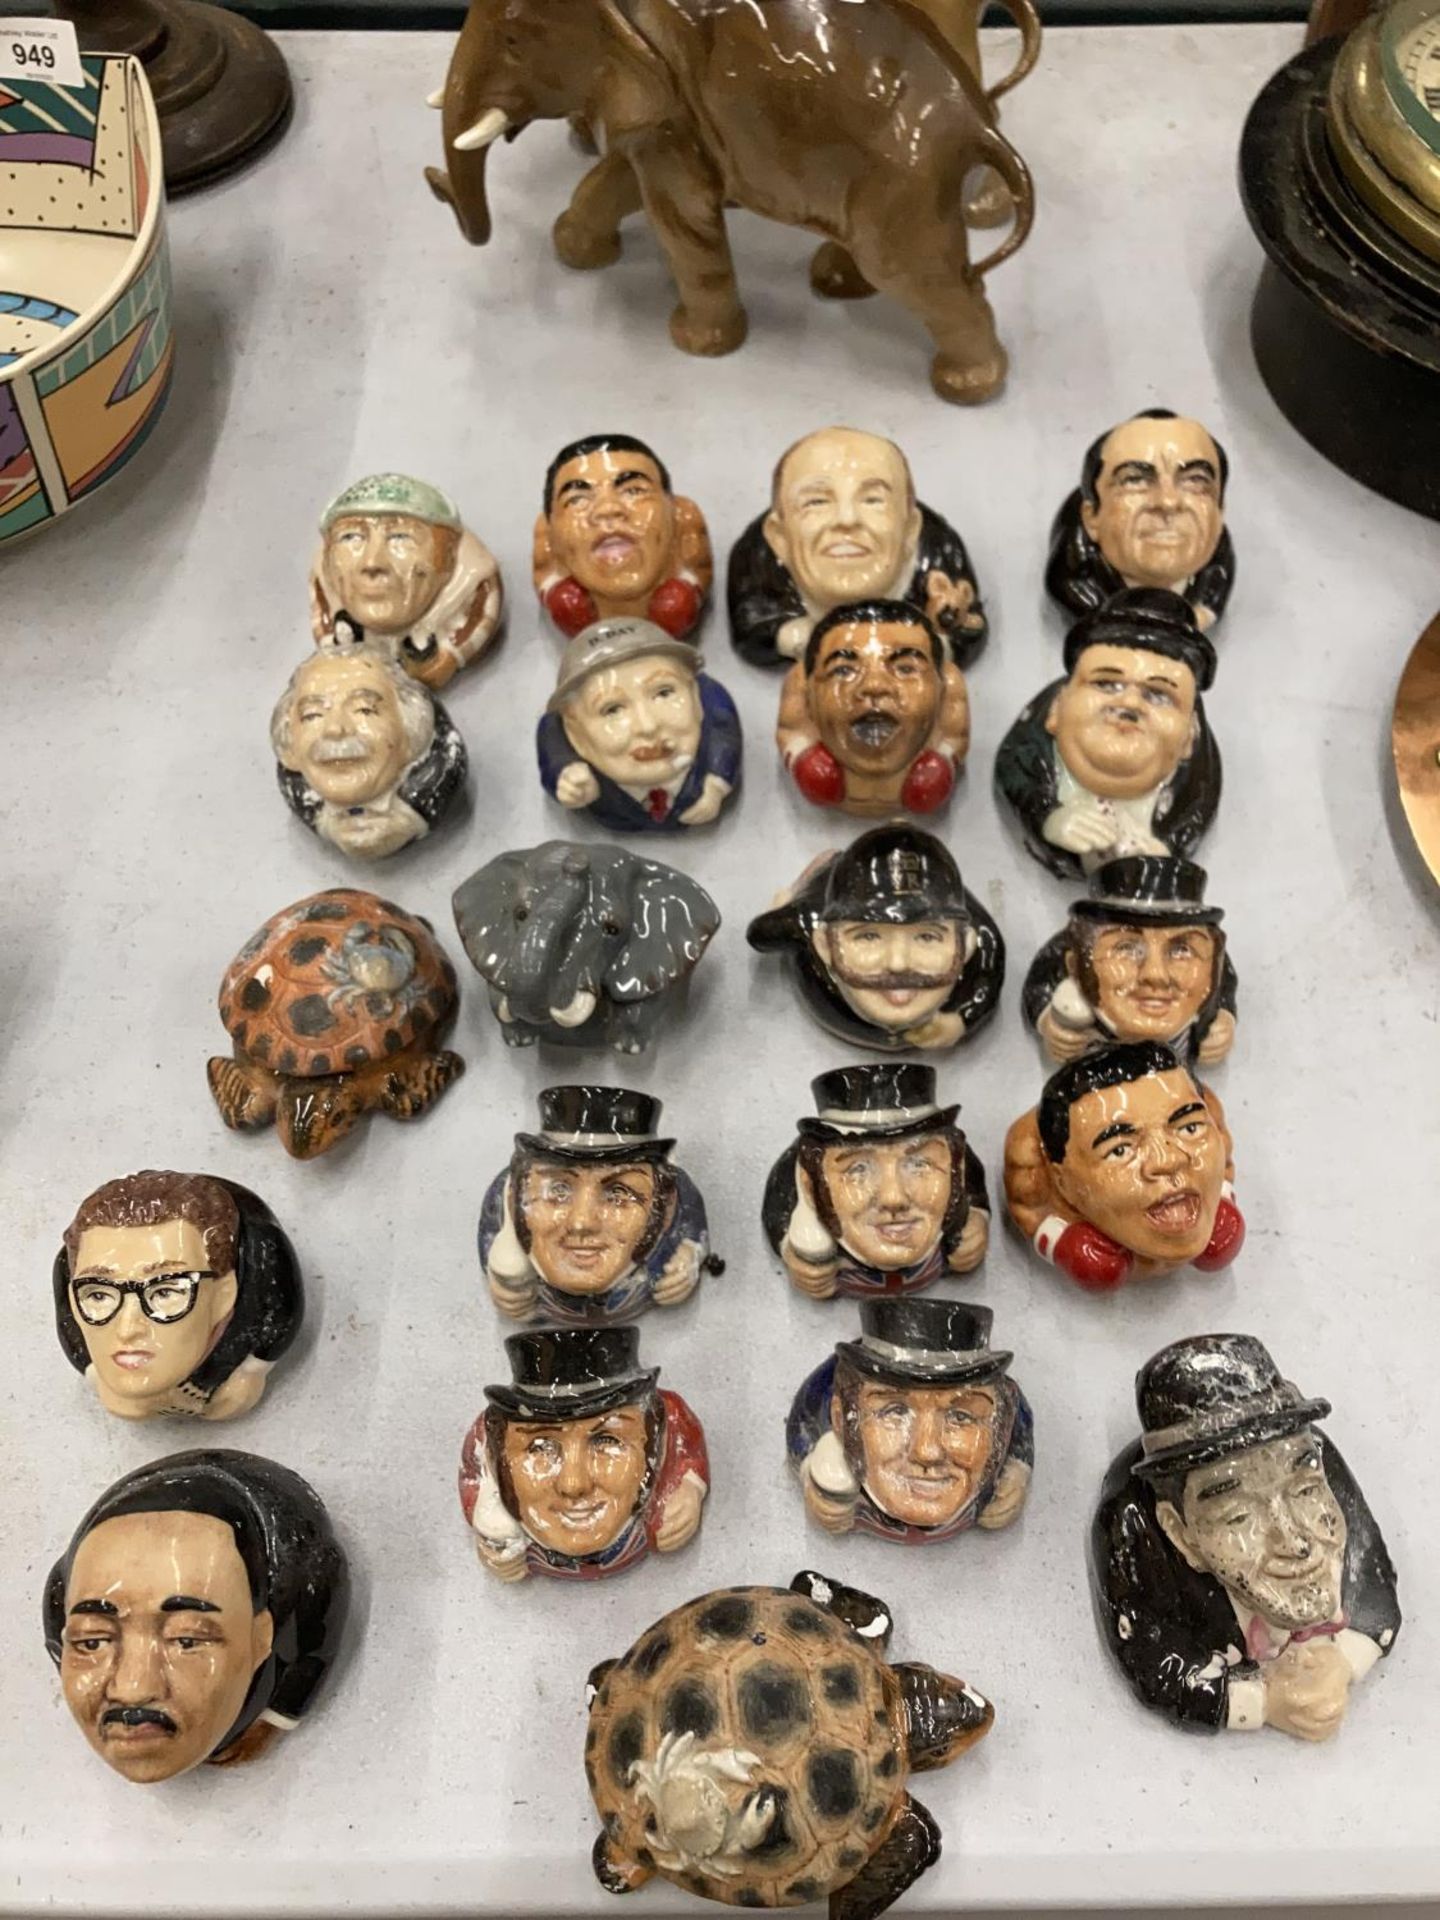 A LARGE COLLECTION OF CERAMIC 'FACE POTS' TO INCLUDE NELLIE, MARTIN LUTHER KING, MUHAMMAD ALI,